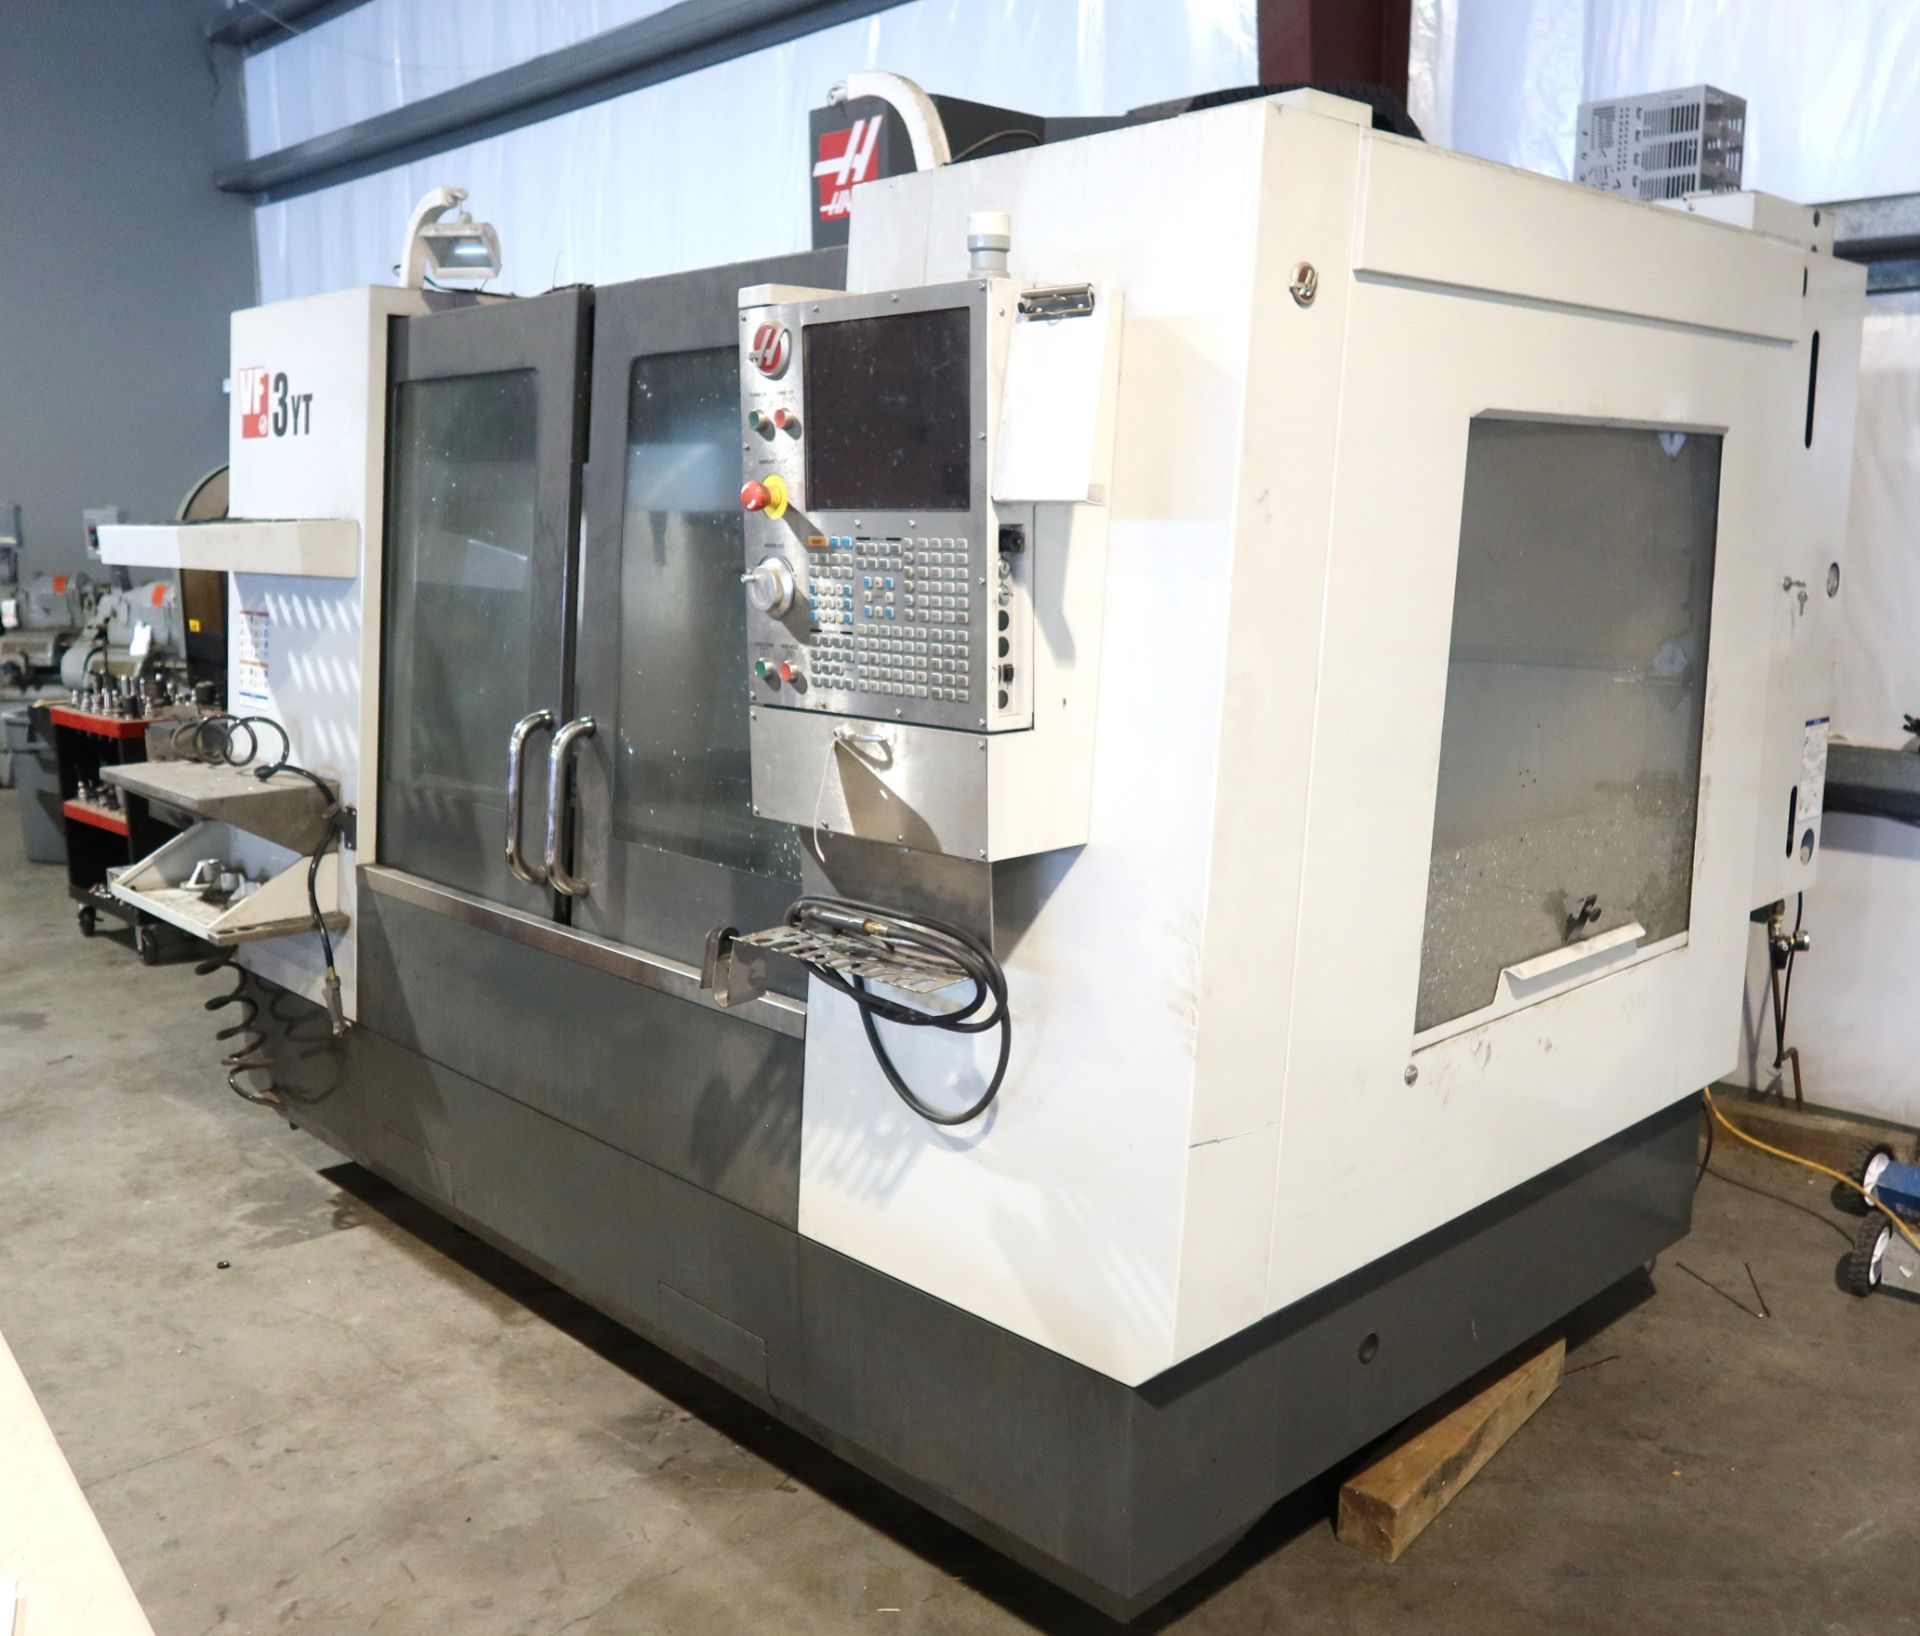 HAAS VF3-YT CNC 4-AXIS PRECISION VERTICAL MACHINING CENTER, S/N 1124918, NEW 2015